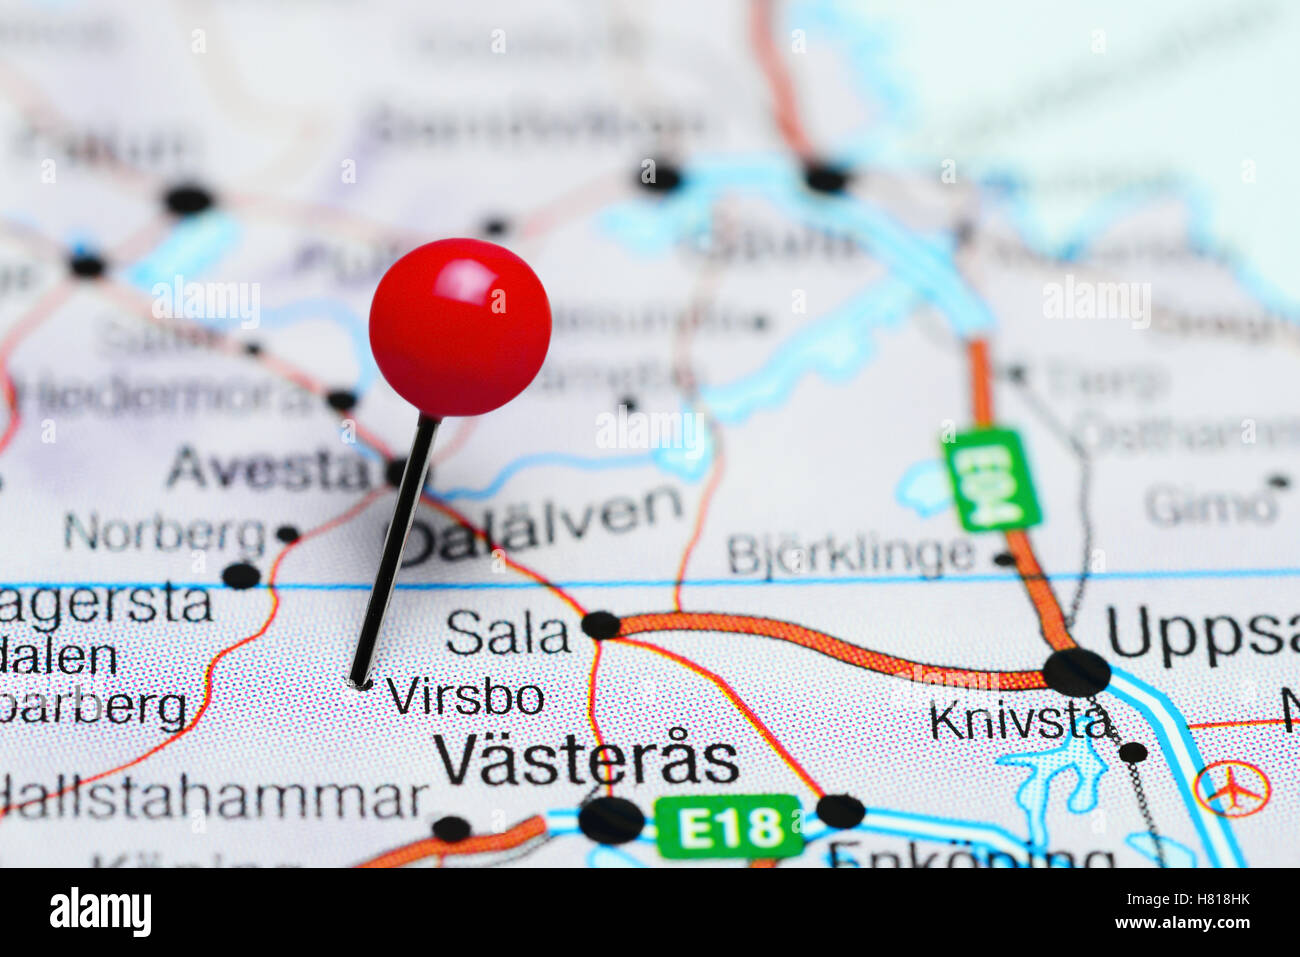 Virsbo pinned on a map of Sweden Stock Photo